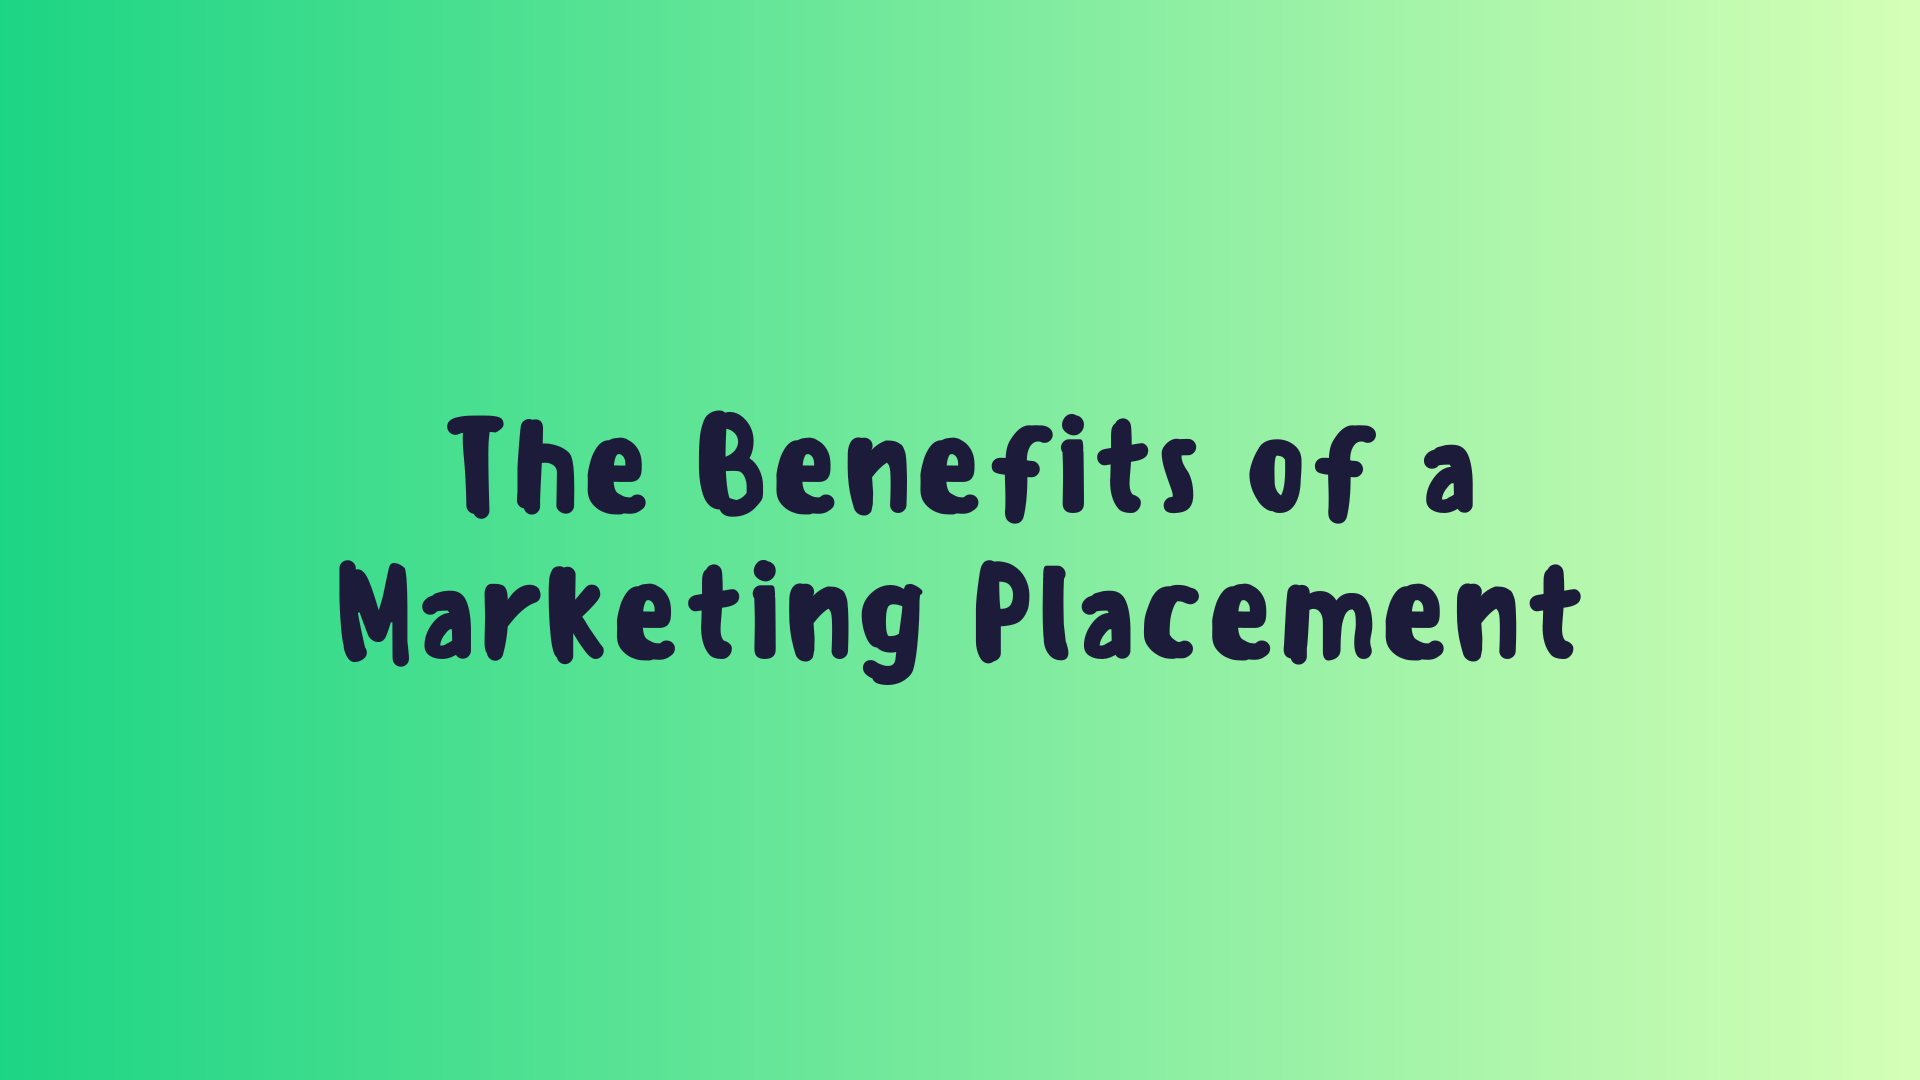 The Benefits of a Marketing Placement